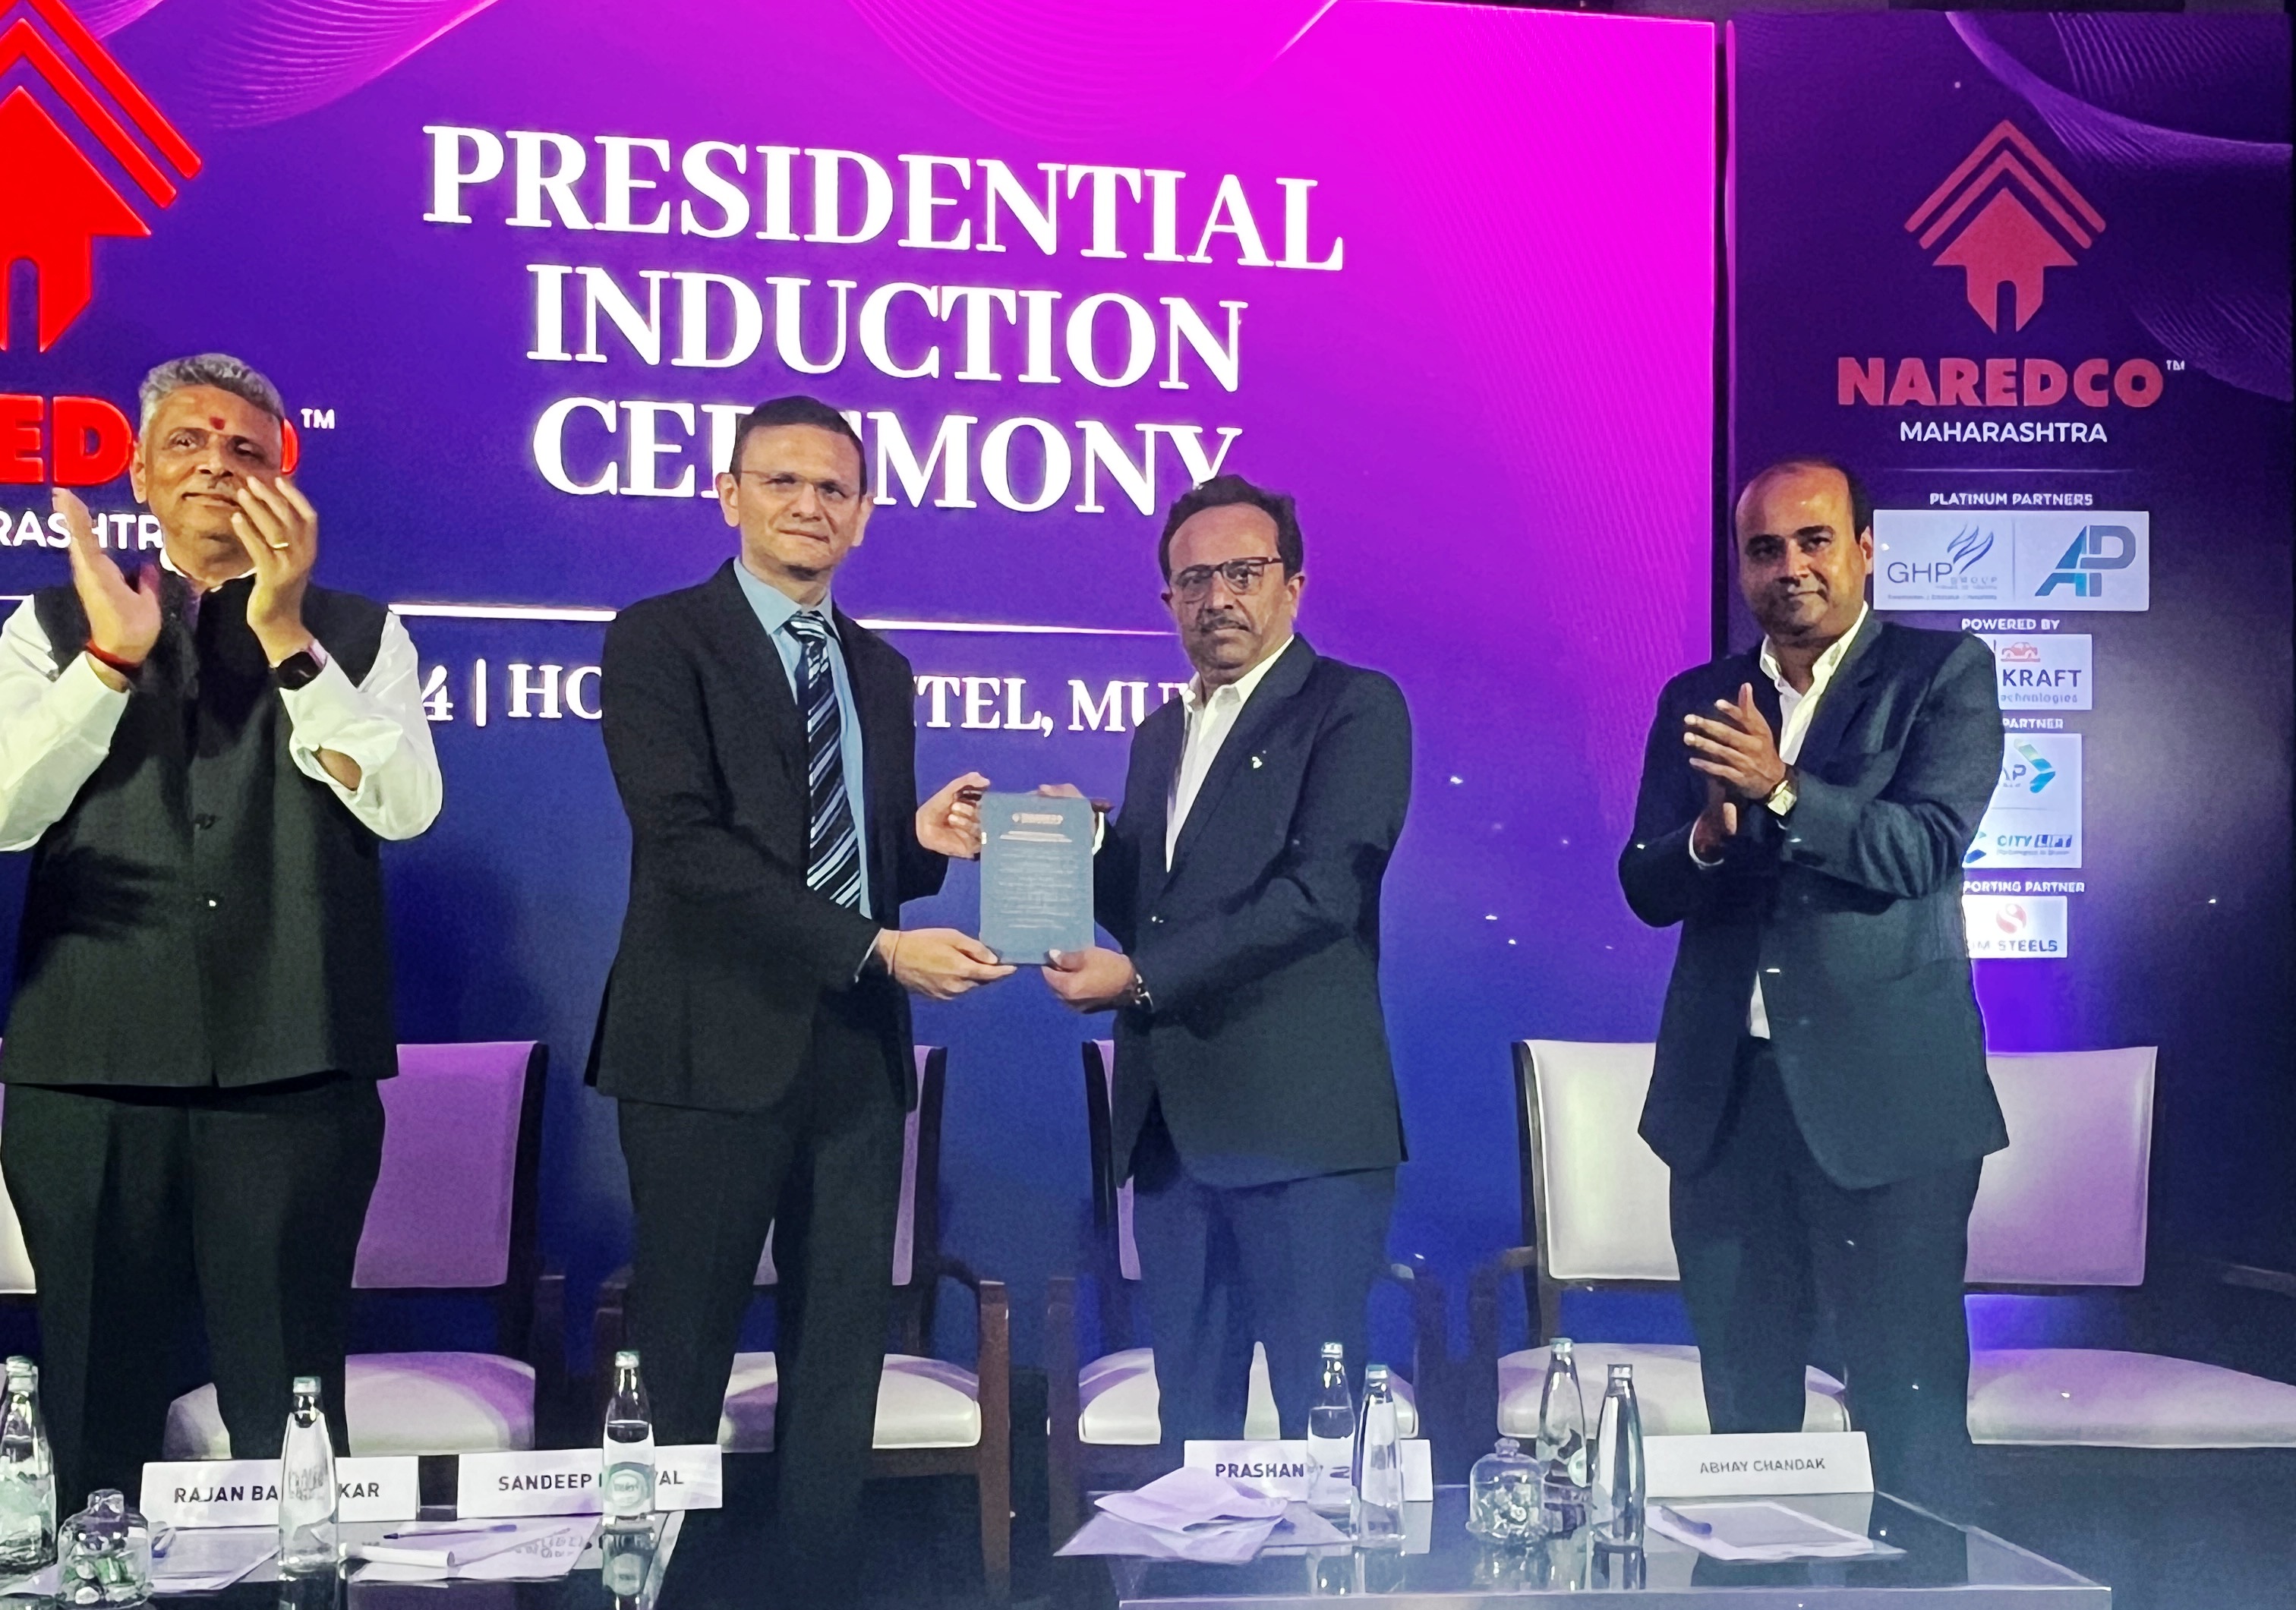 Prashant Sharma Appointed As New President Of NAREDCO